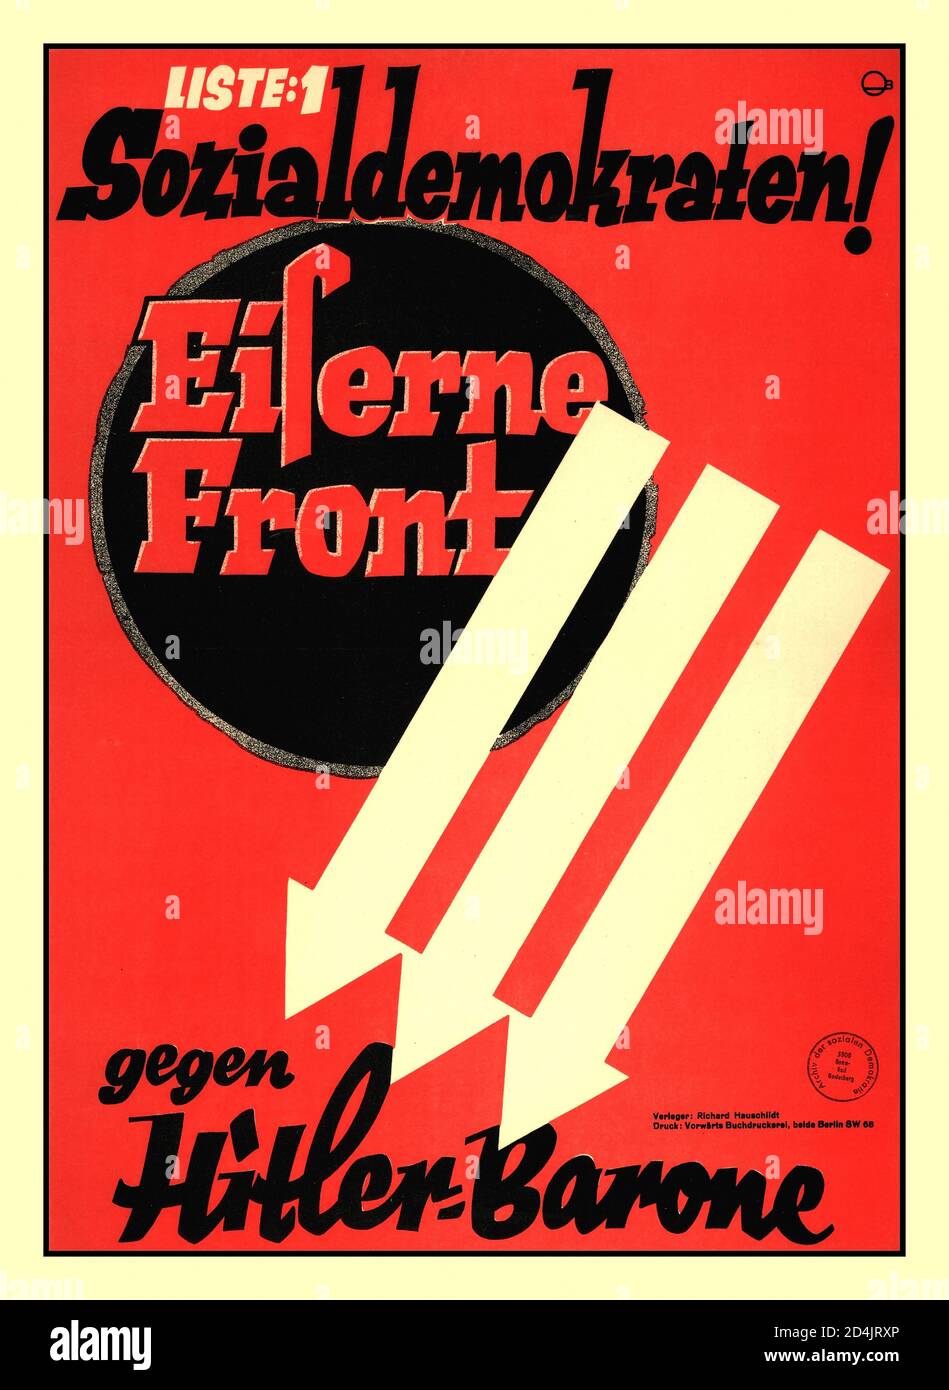 Archive Nazi Election poster of the SPD for the German Reichstag election of November 6, 1932  Eiserne Front 1932  Hitler Versus Barone Federal elections were held in Germany on 6 November 1932. The Nazi Party saw its vote share fall by four percent, while there were slight increases for the Communist Party of Germany and the national conservative German National People's Party. The results were a great disappointment for the Nazis, who lost 34 seats and failed to form a coalition government in the Reichstag. Stock Photo